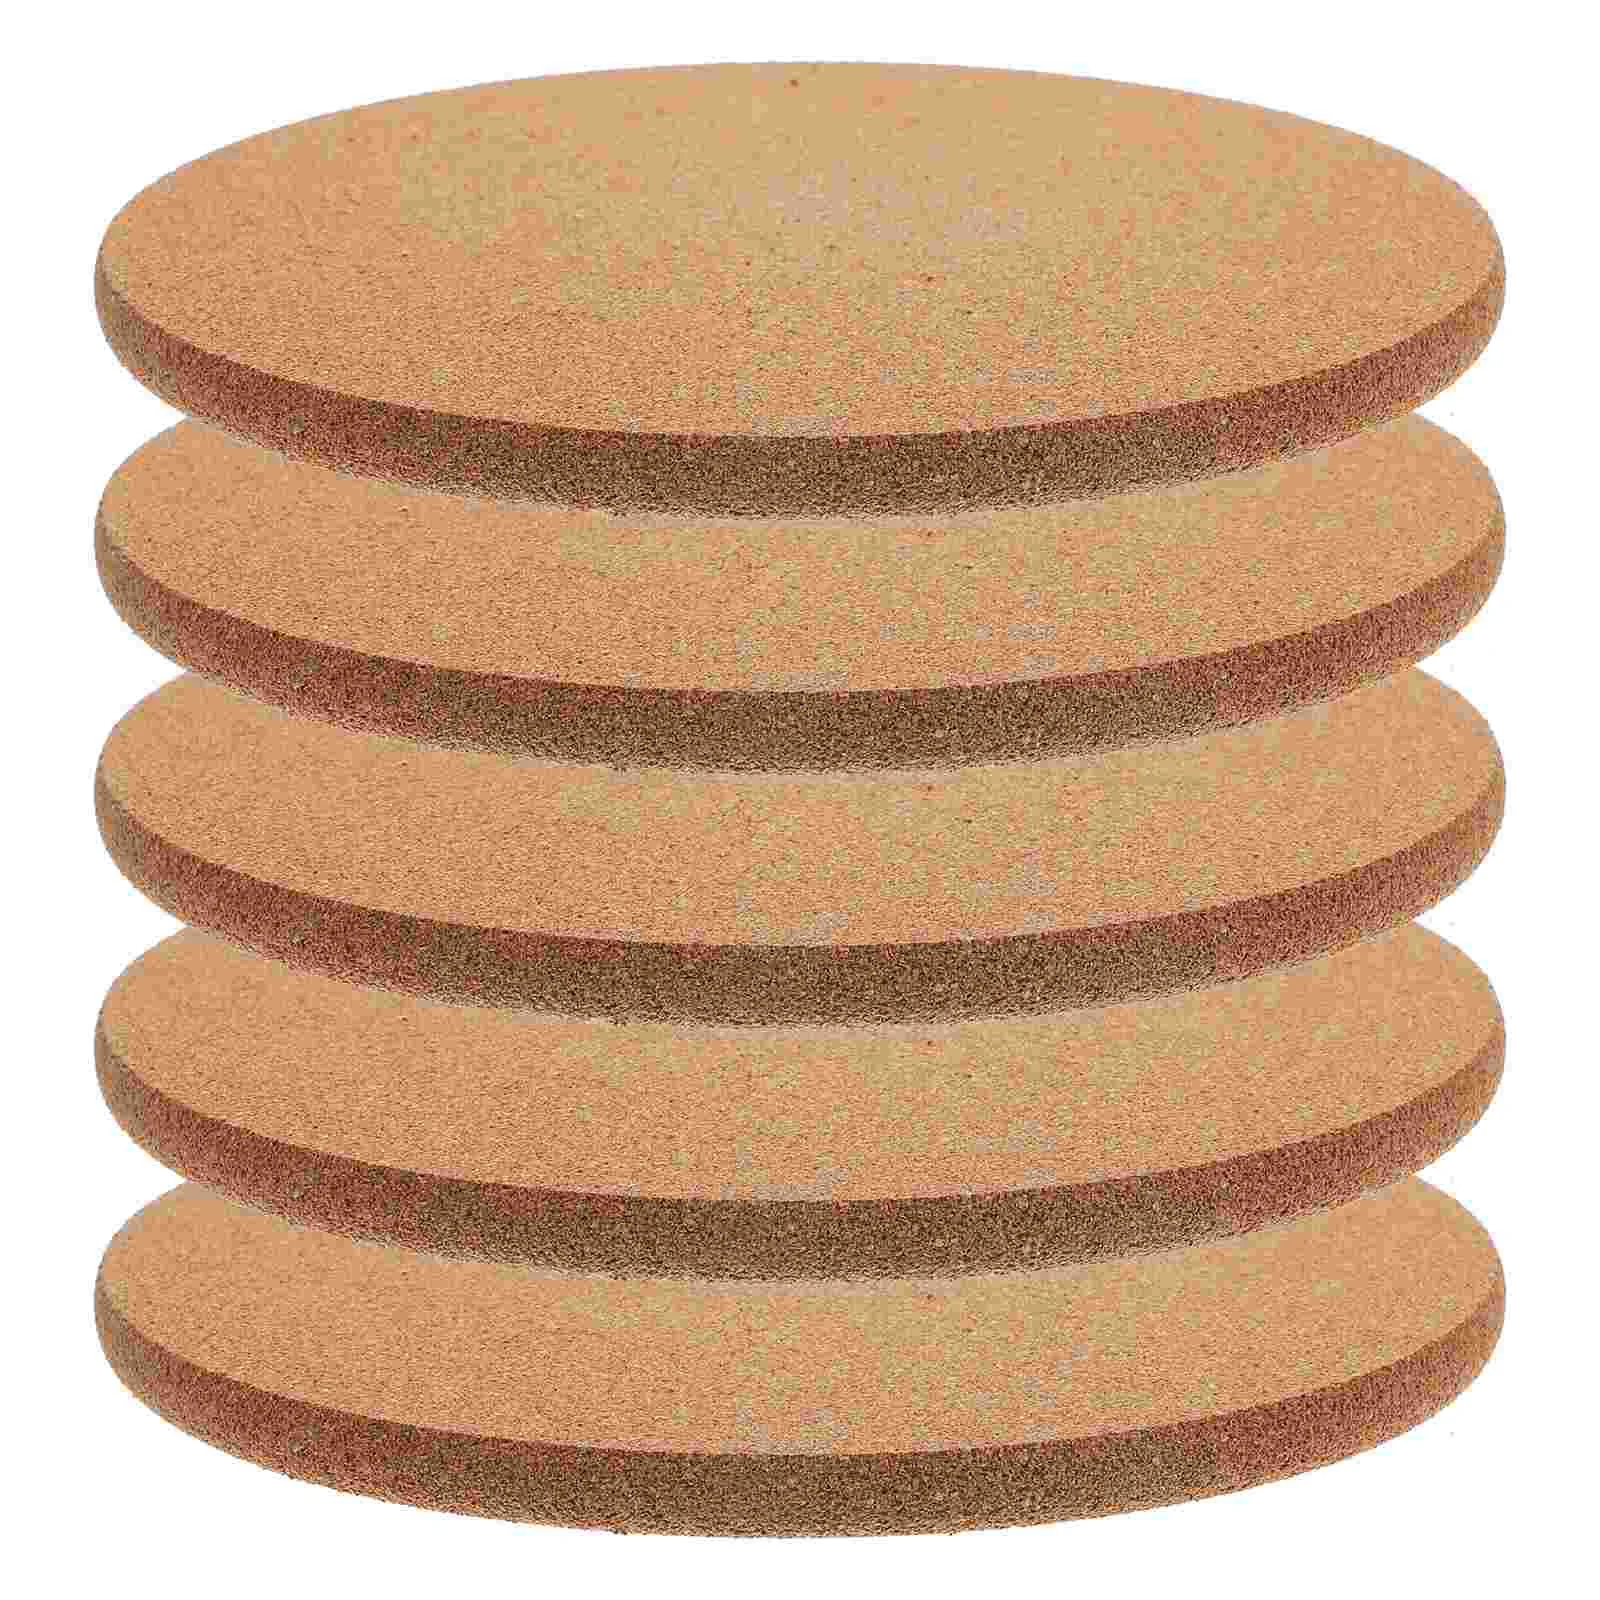 

5 Pcs Cork Coaster Drink Coasters Drinks Placemats Water Proof Cup Home Hot Pads Table Decorative Office